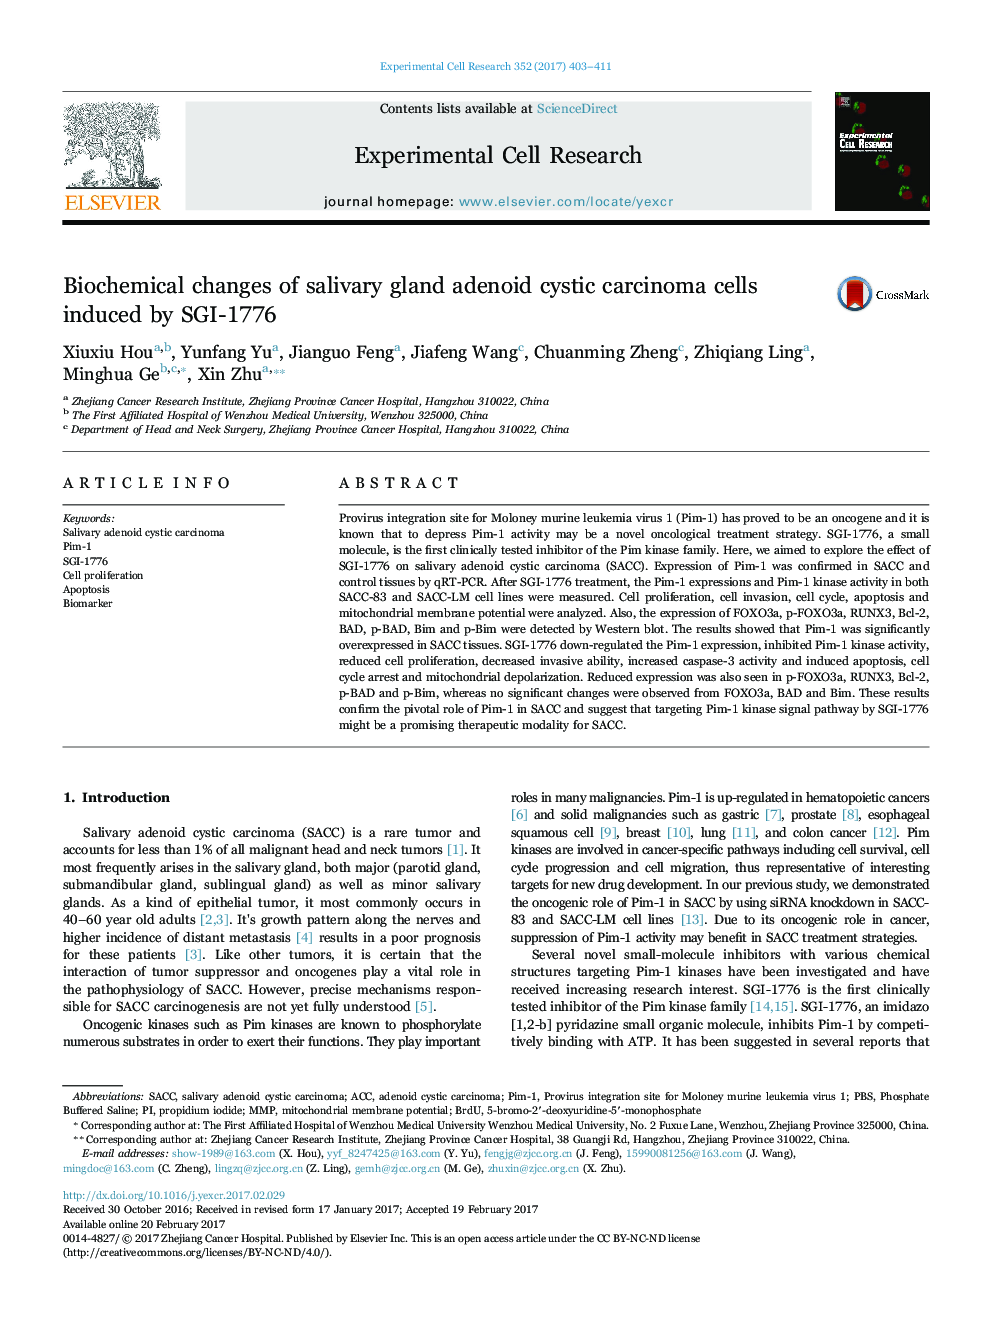 Biochemical changes of salivary gland adenoid cystic carcinoma cells induced by SGI-1776